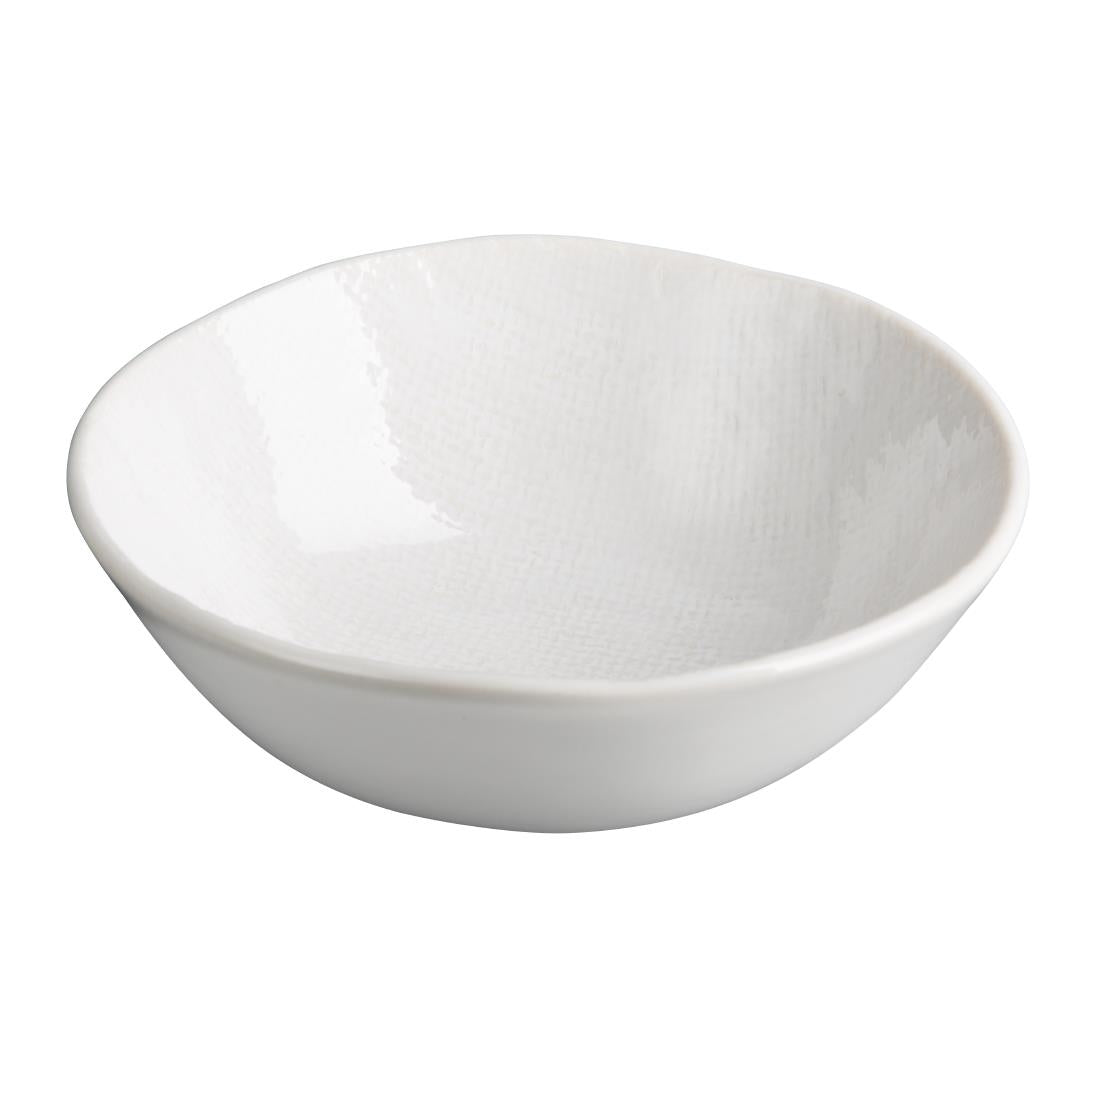 FU229 Olympia Denim White Coupe Bowls 160mm (Pack of 6)